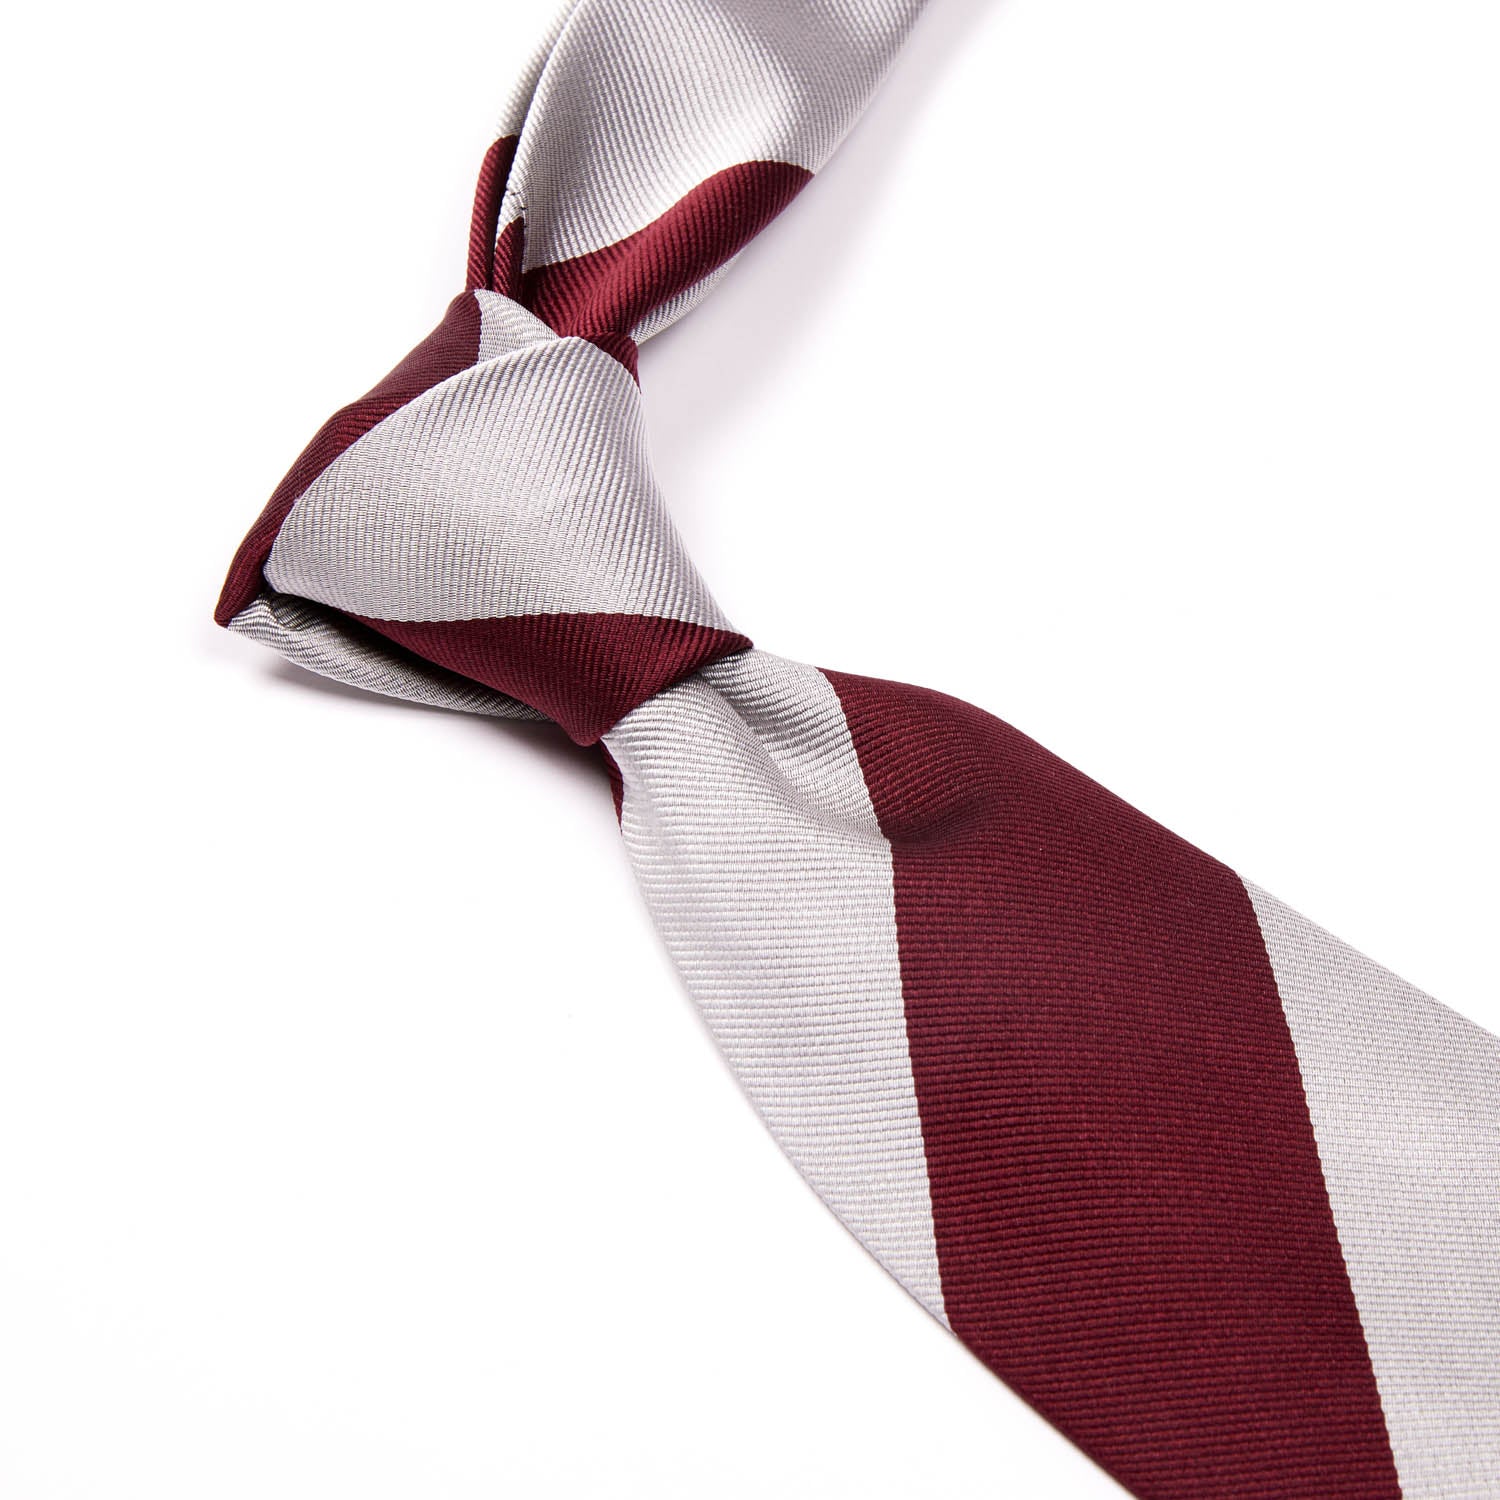 A Sovereign Grade Oxblood Wide Rep Tie, 150cm on a white background.